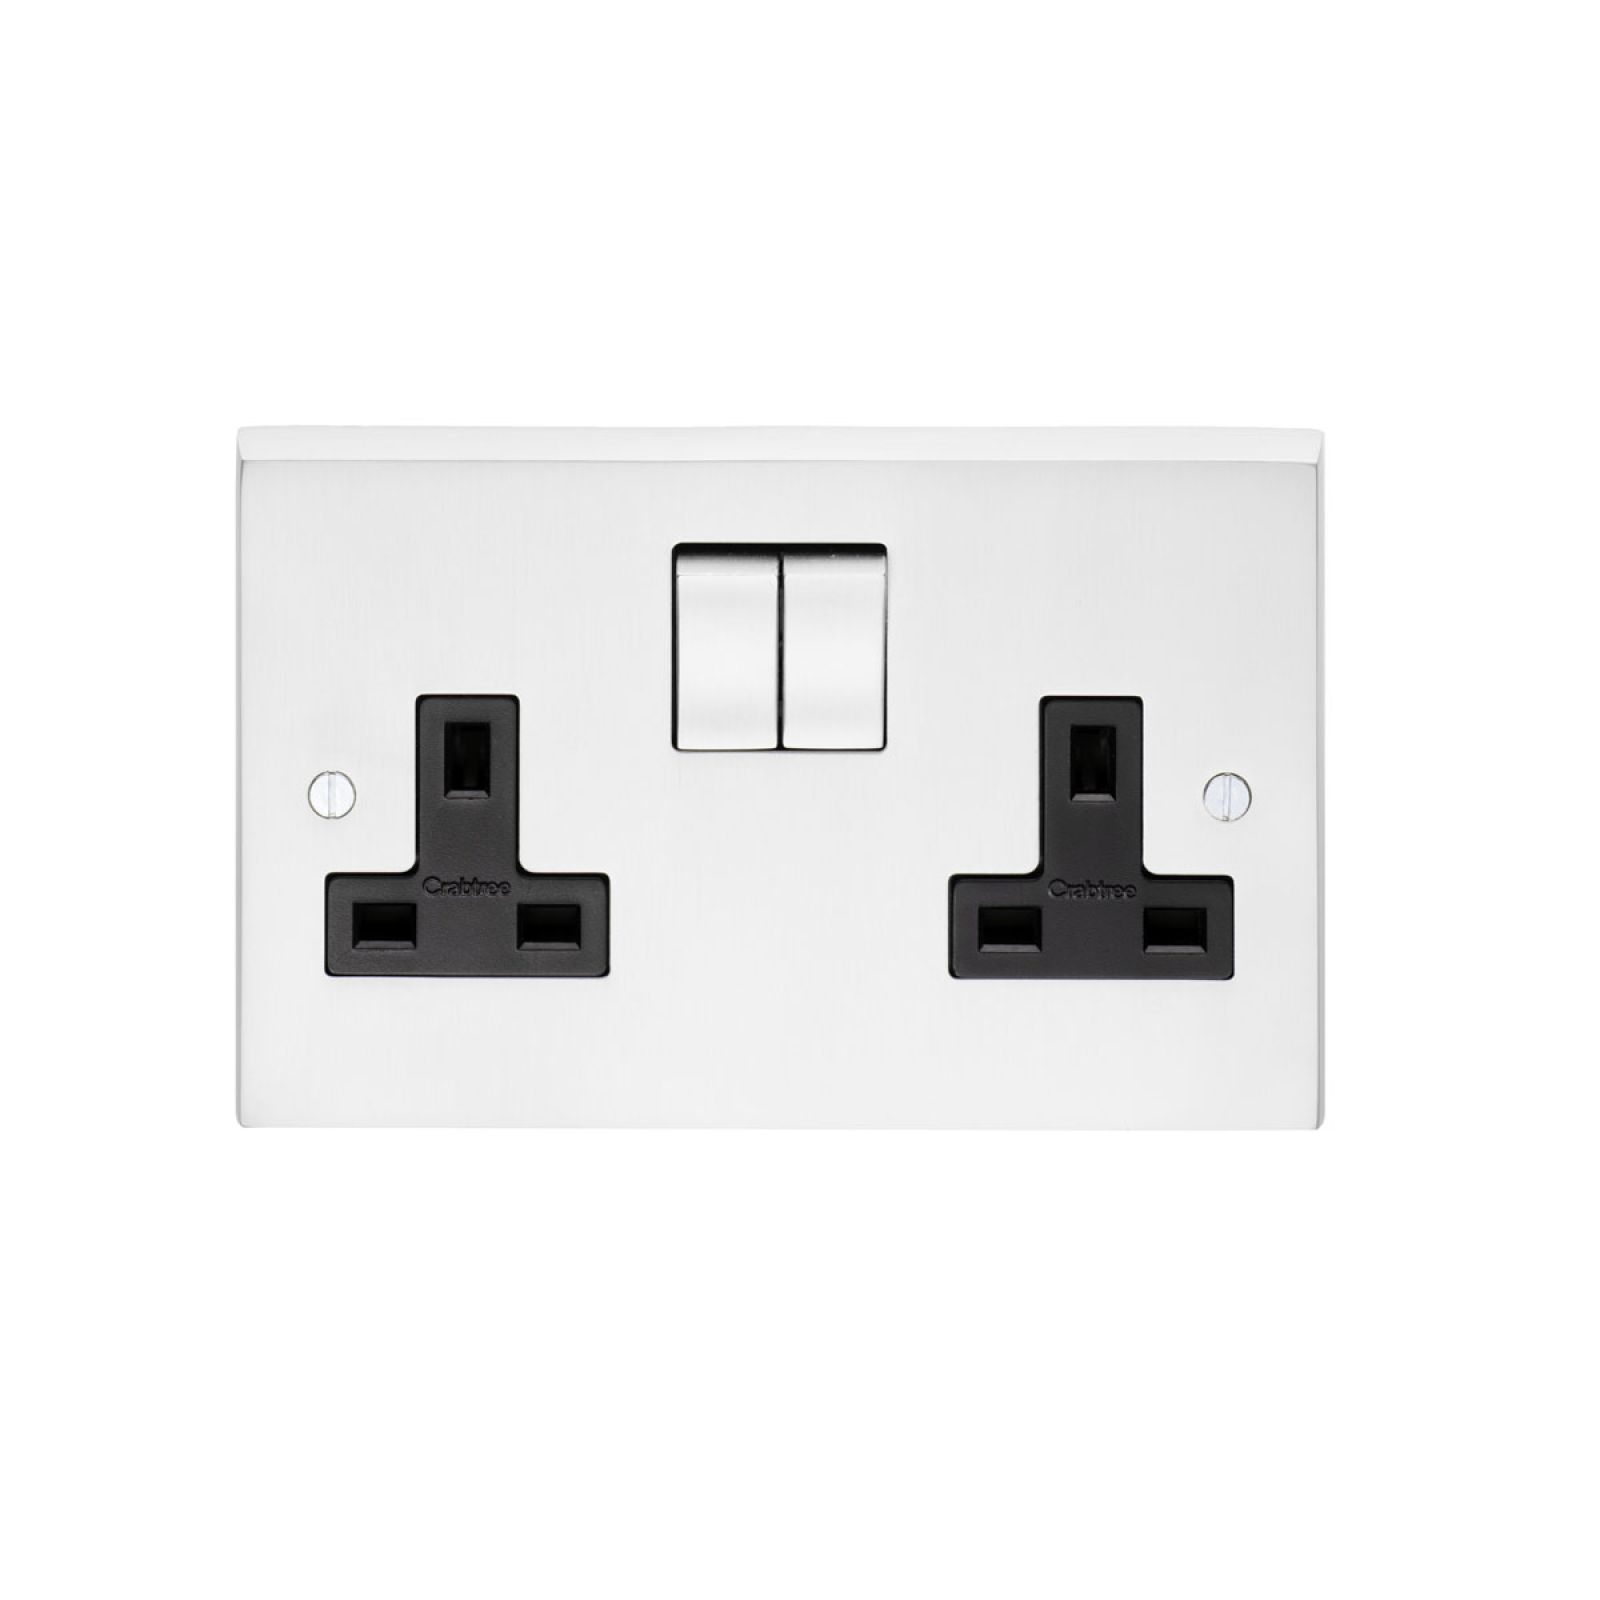 2 Gang 13amp DP Switched Socket in brass, chrome or satin chrome